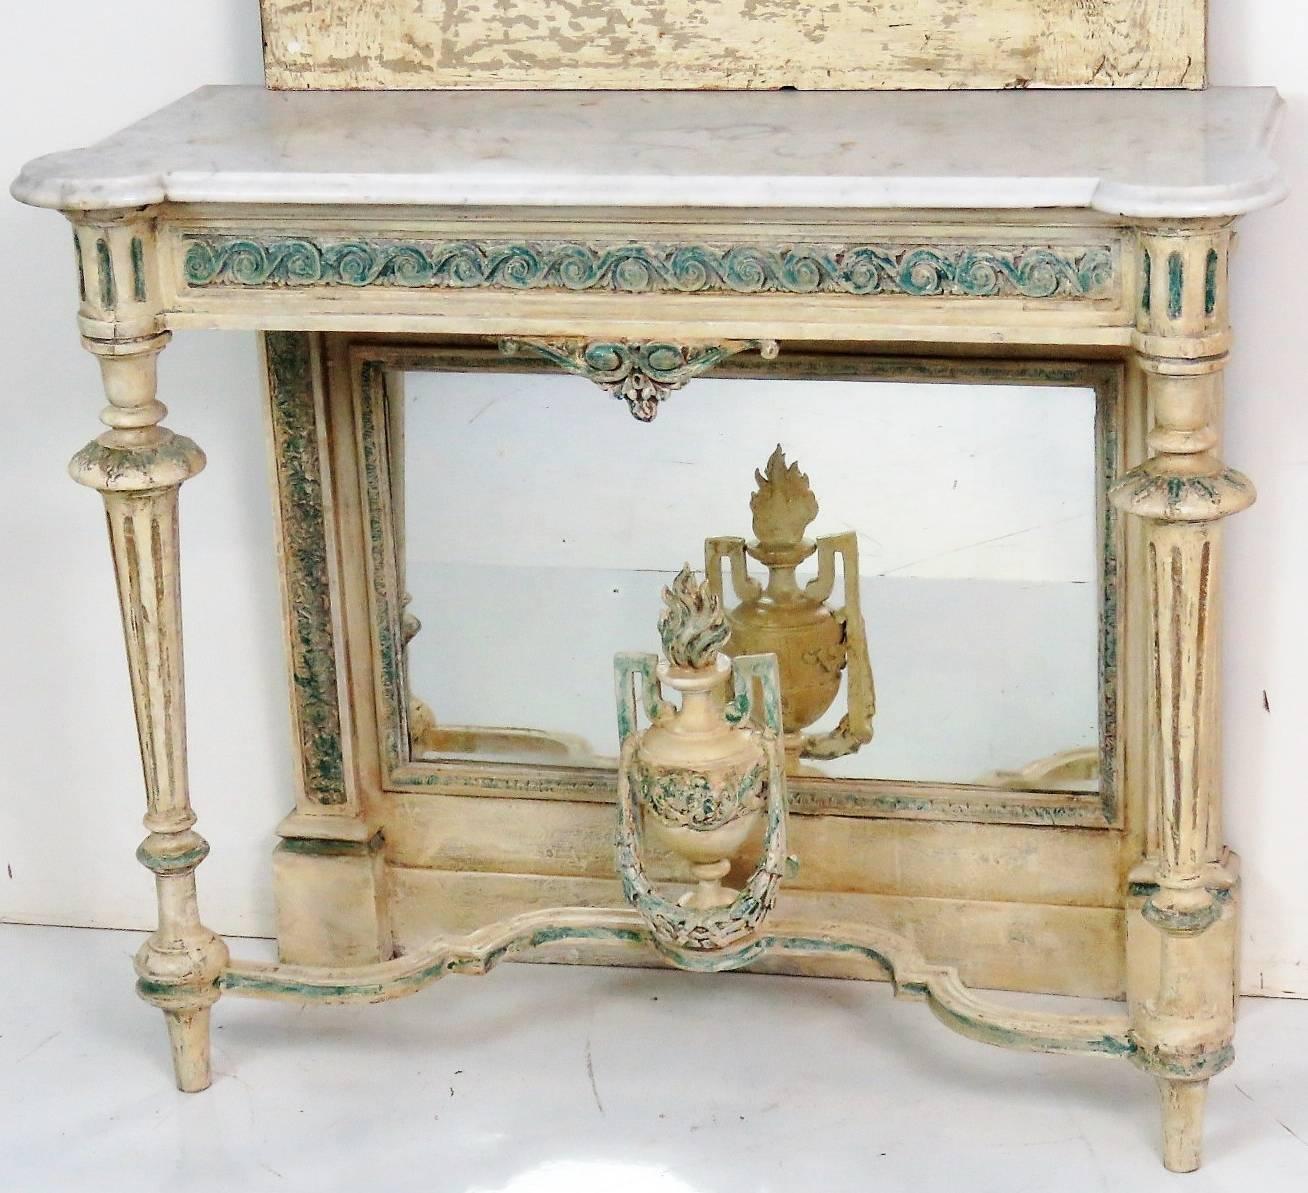 20th Century Louis XVI Style Distressed Cream Painted Marble-Top Console and Mirror